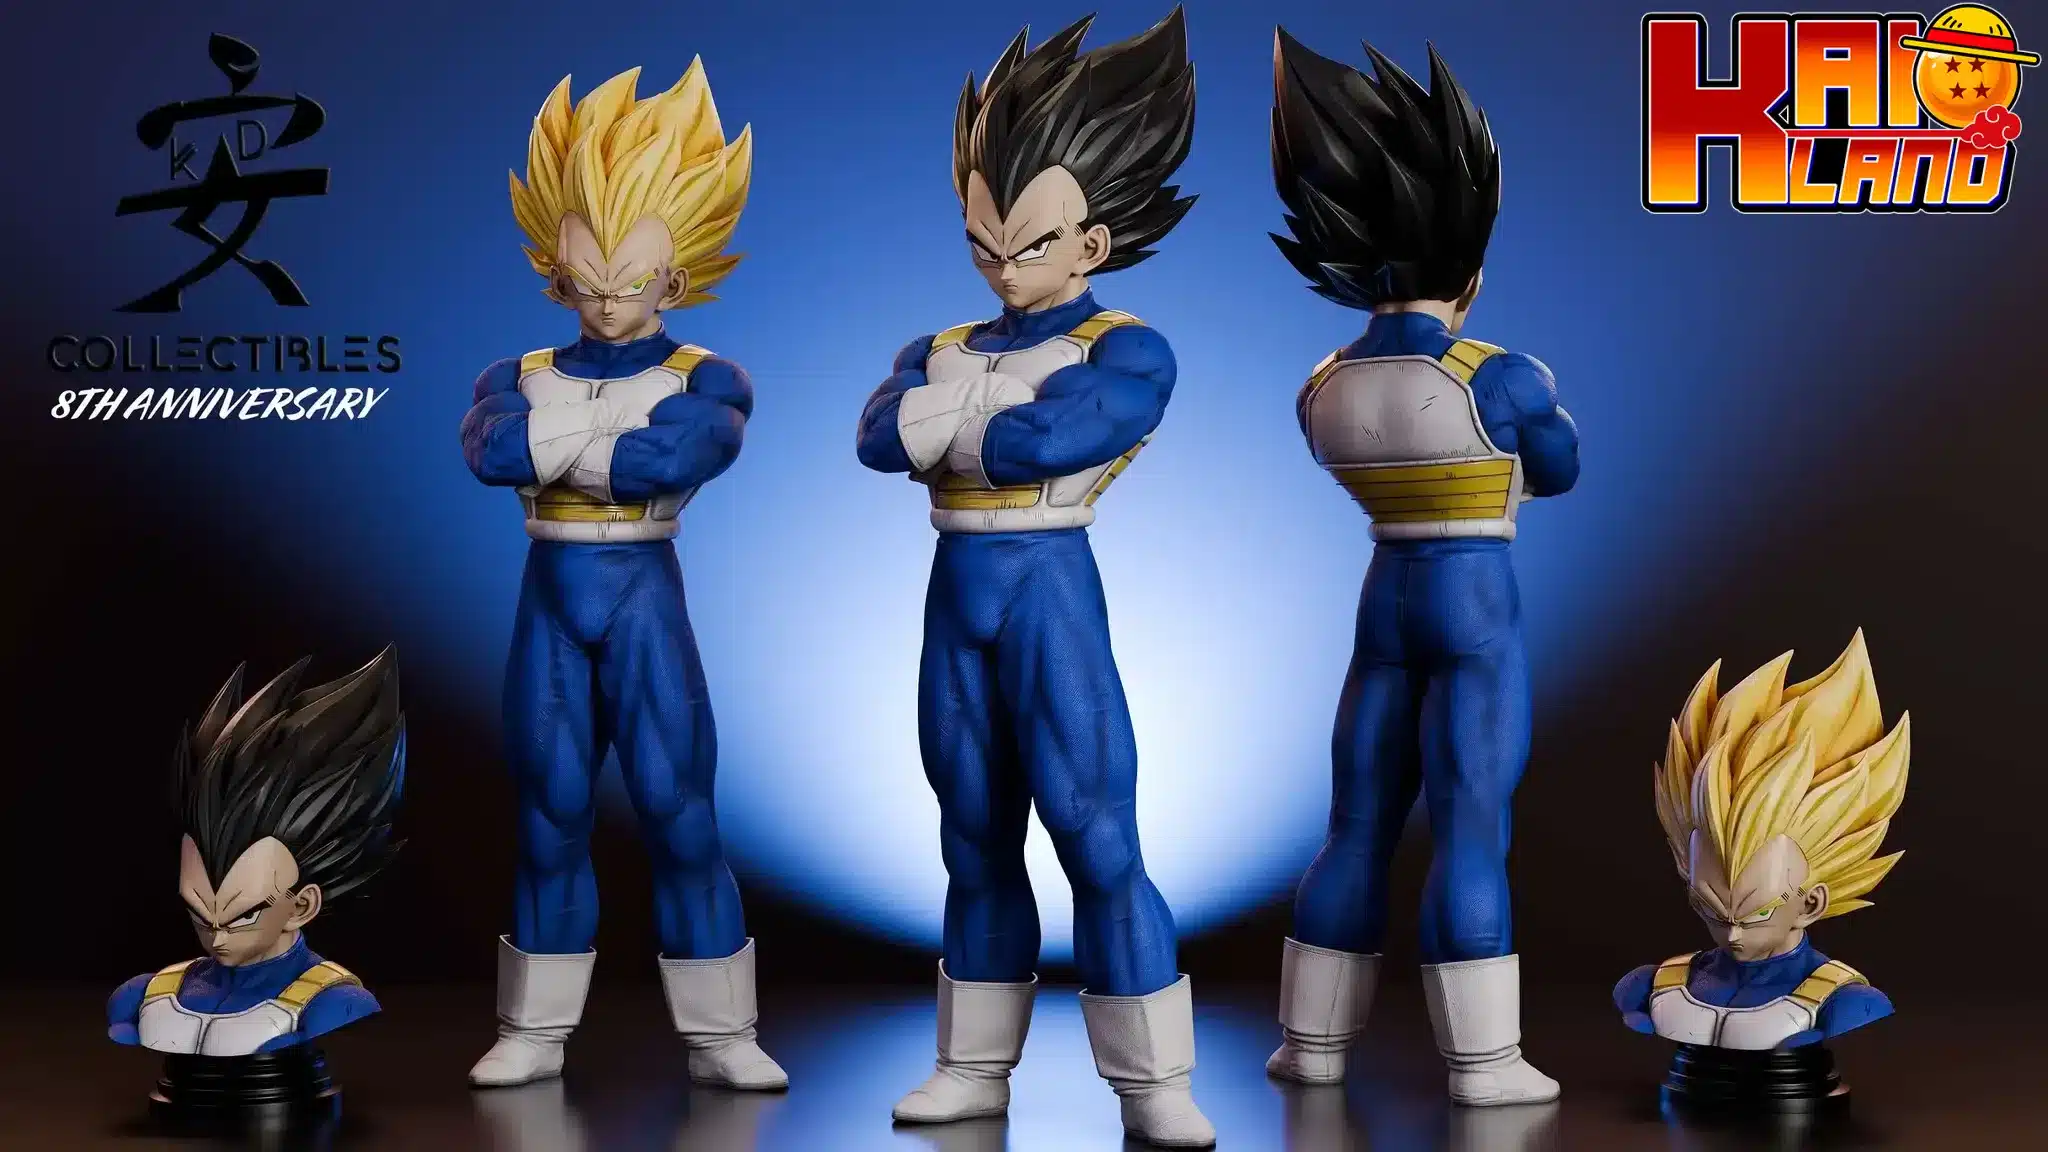 Dragon-Ball-KD-Collectibles-Z-Fighters-Resin-Statue-20-jpg.png